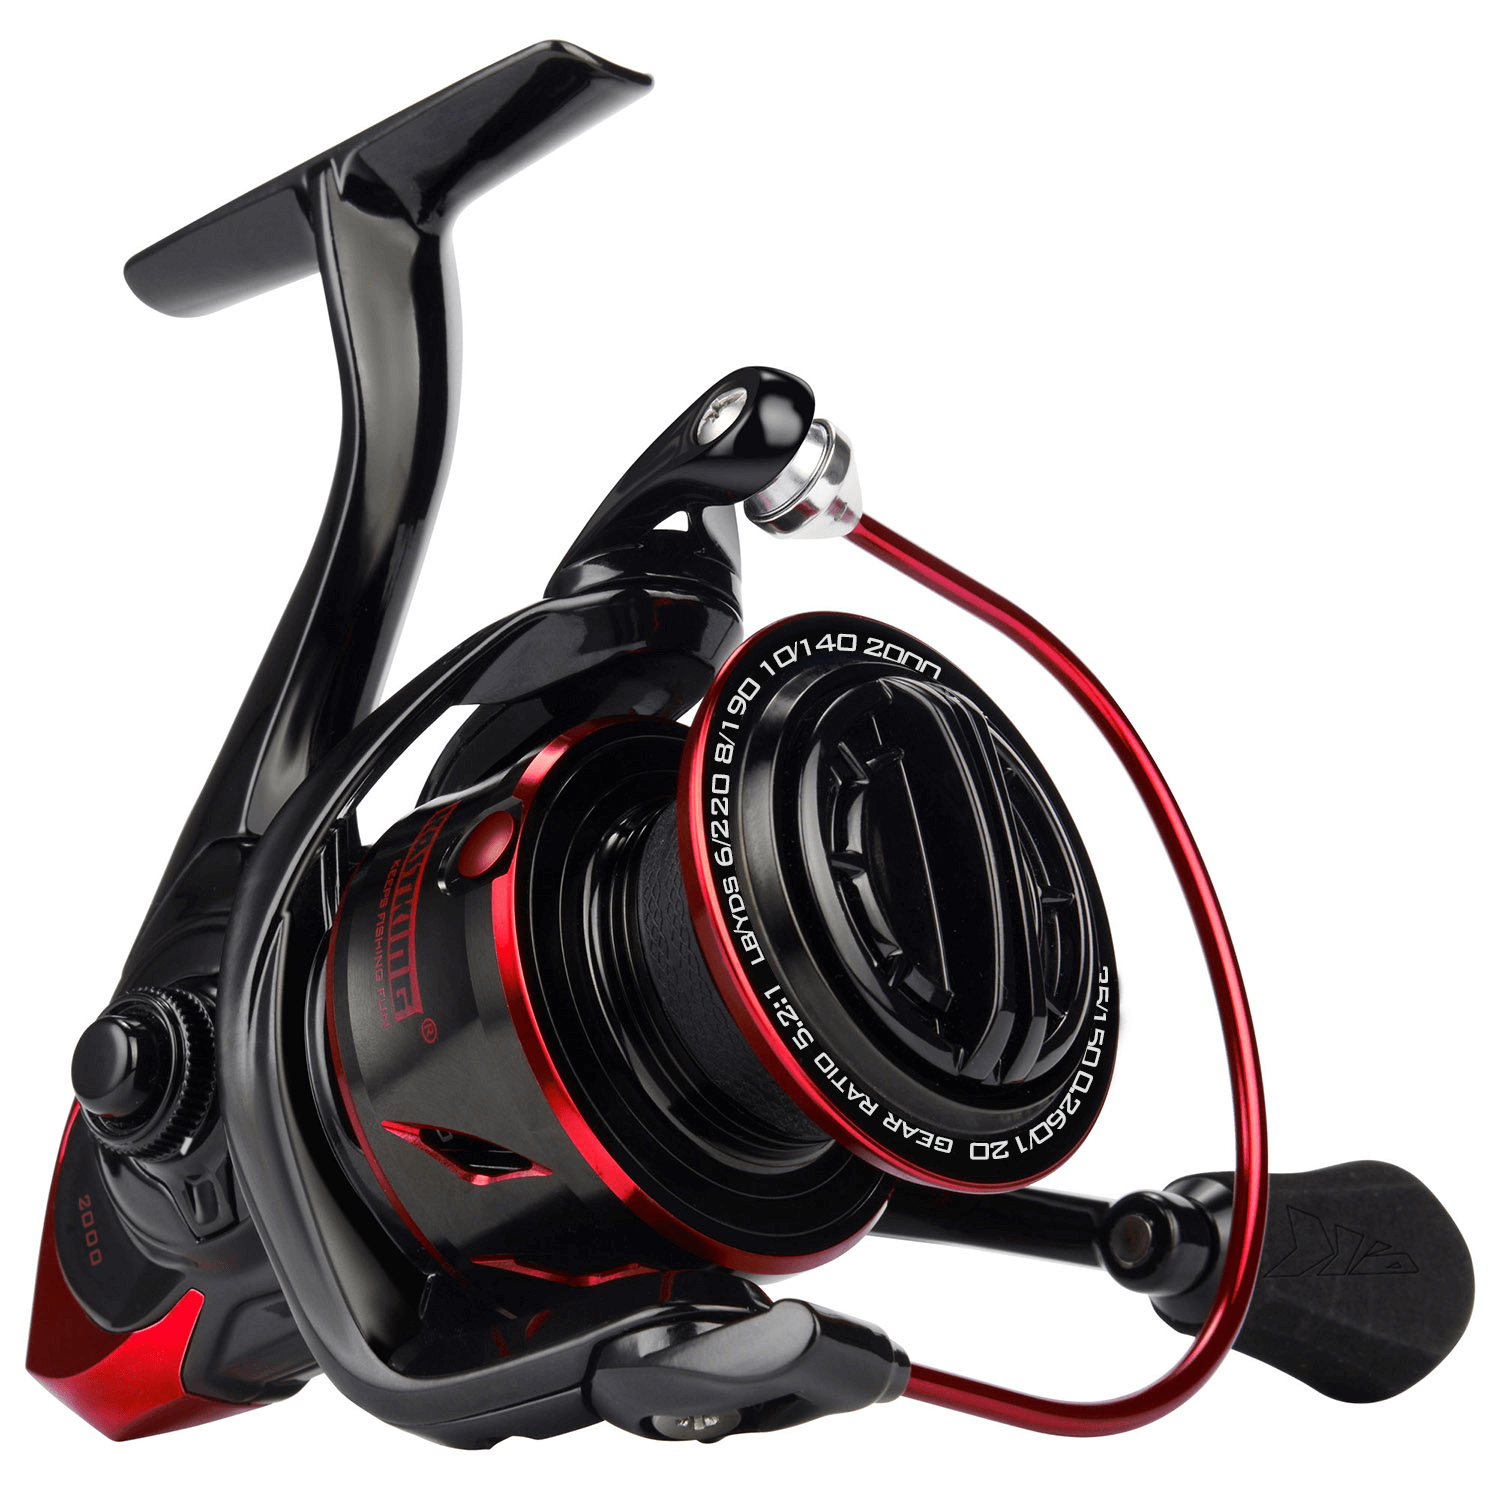 KastKing Spinning Reel and Rod Combos For Performance Fishing